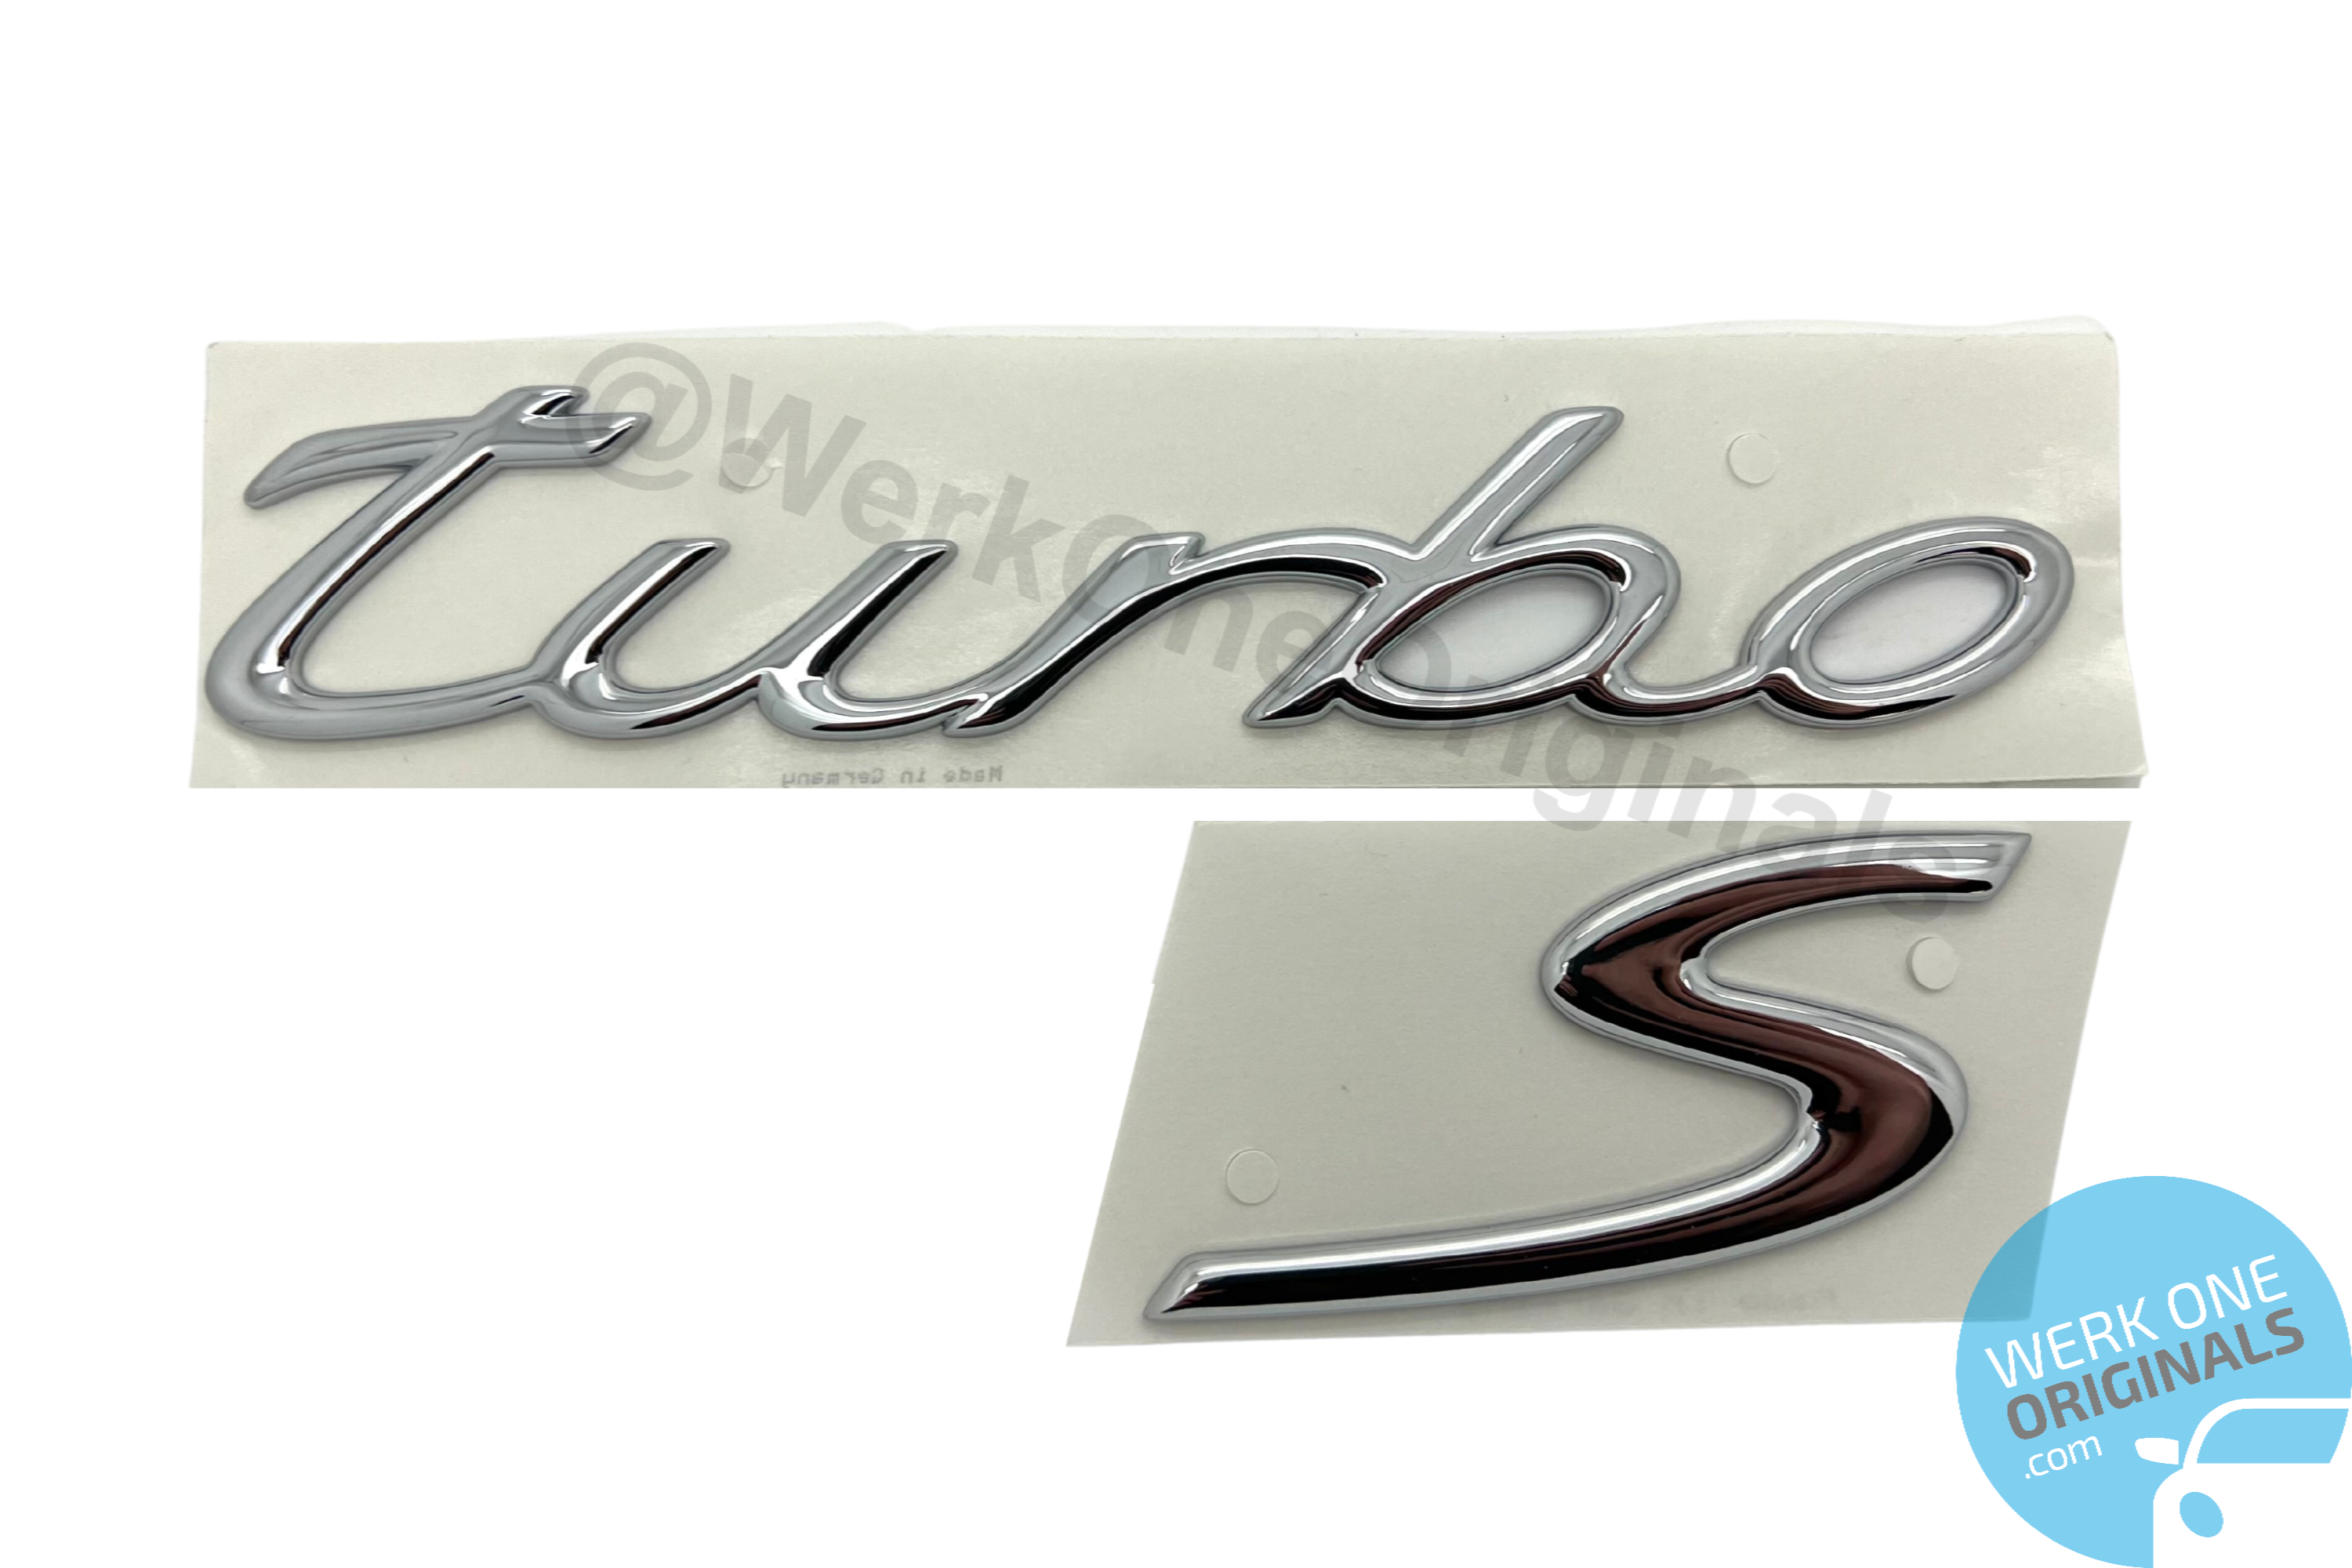 Porsche Official 'Turbo S' Rear Badge Decal in Chrome Silver for 996 Turbo S Models